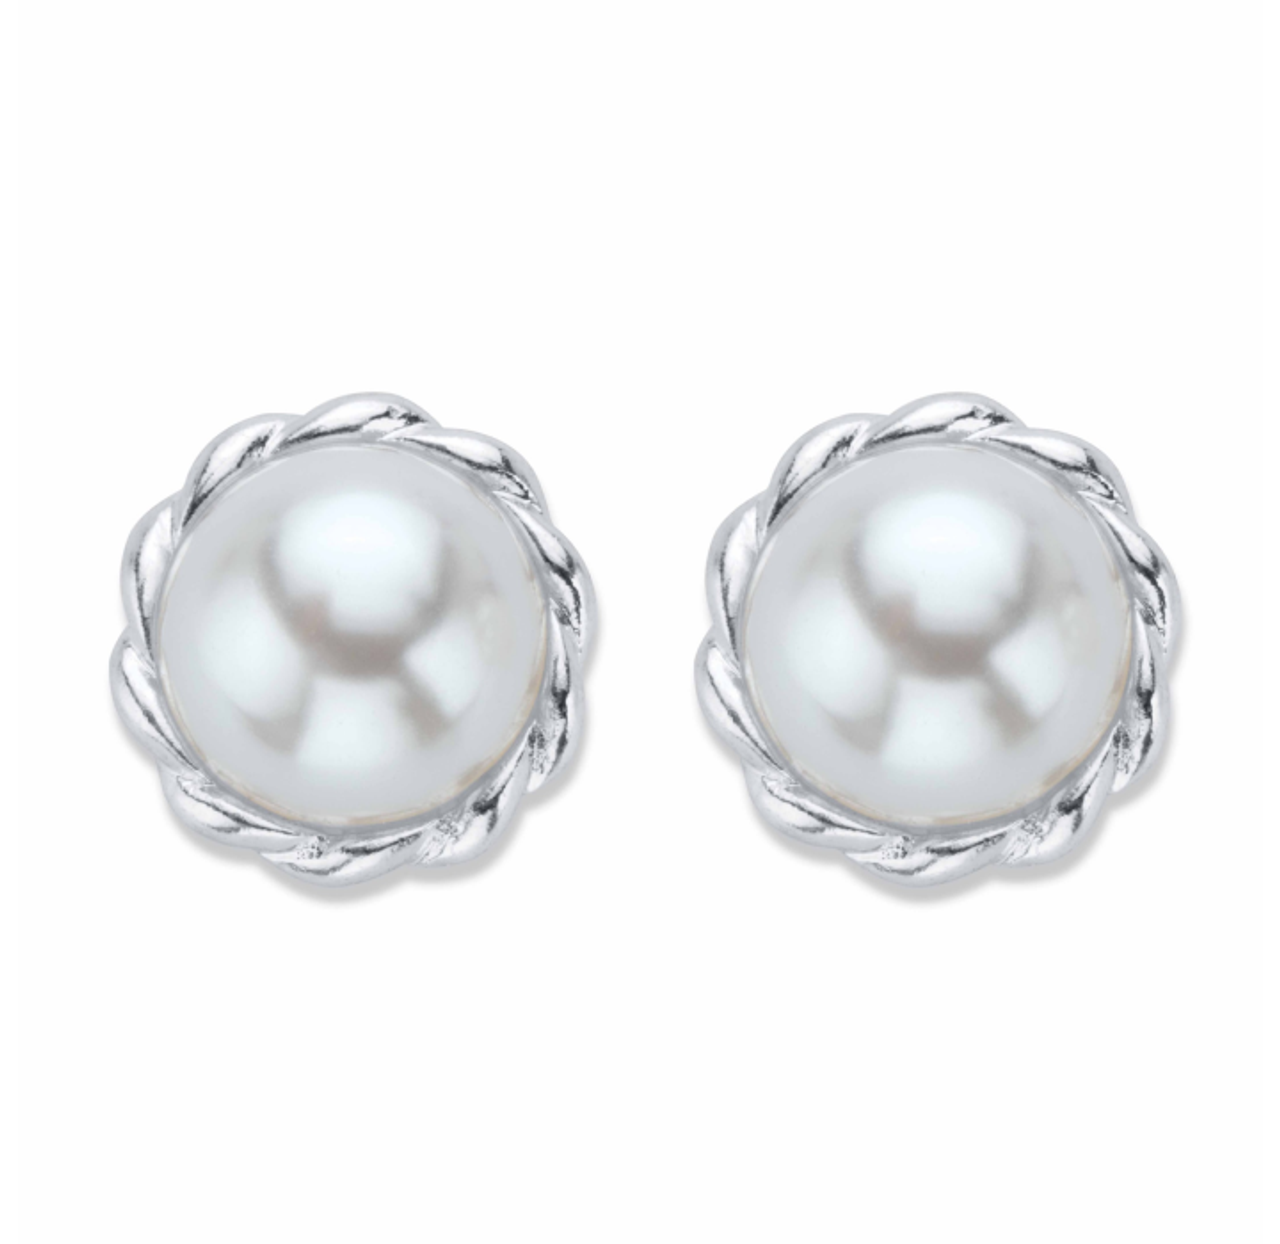 Silvertone Round Simulated Pearl Button Earrings product image